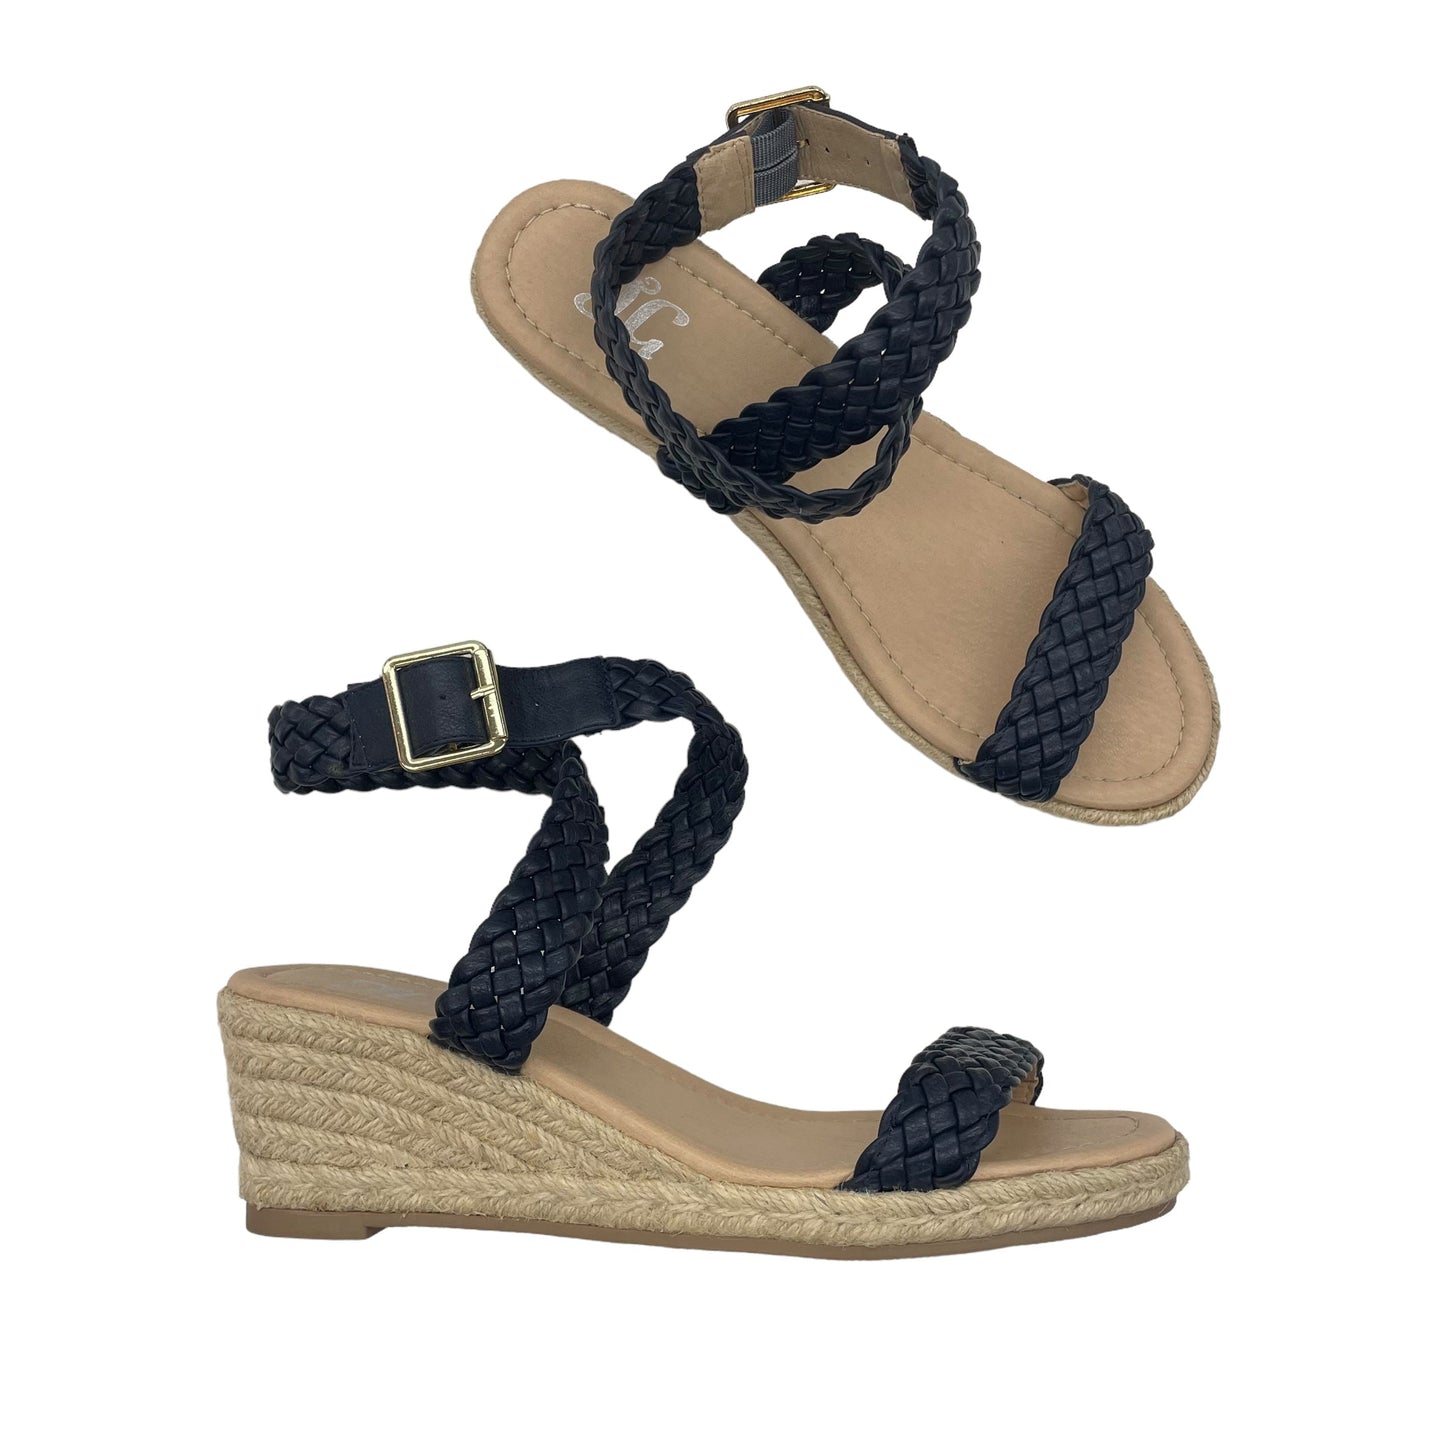 Sandals Heels Wedge By Jg Collections  Size: 8.5